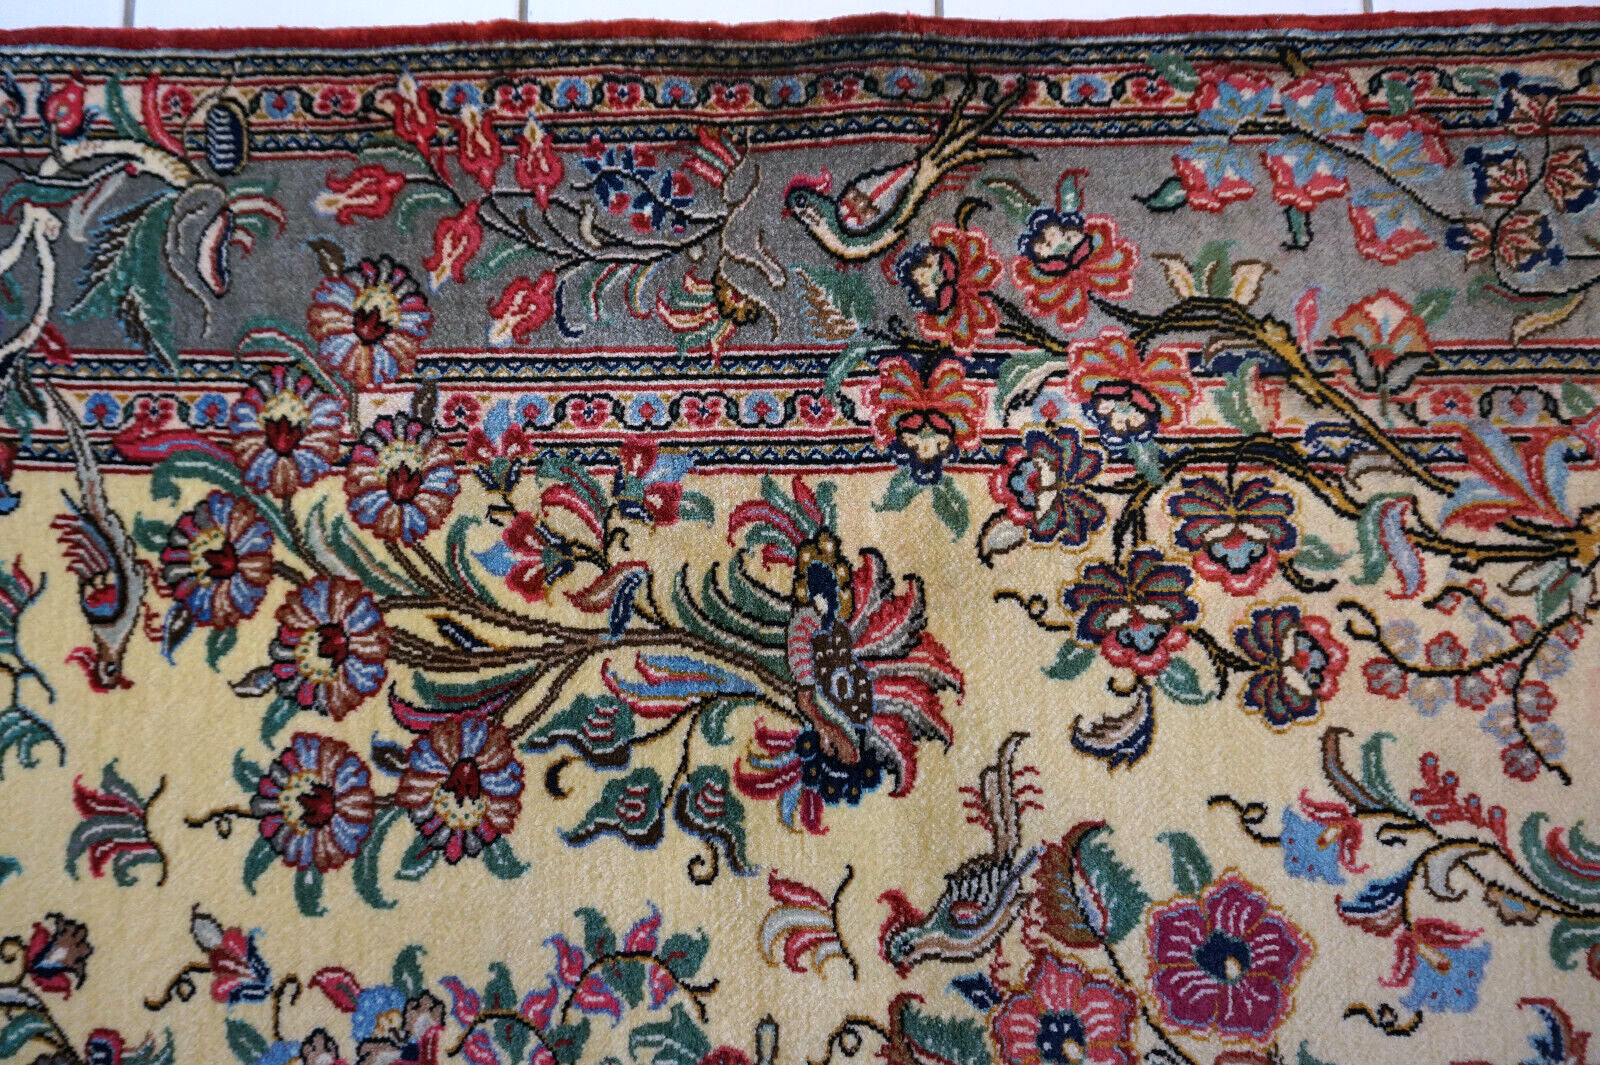 Close-up of the colorful flowers and birds design on the vintage Qum rug.